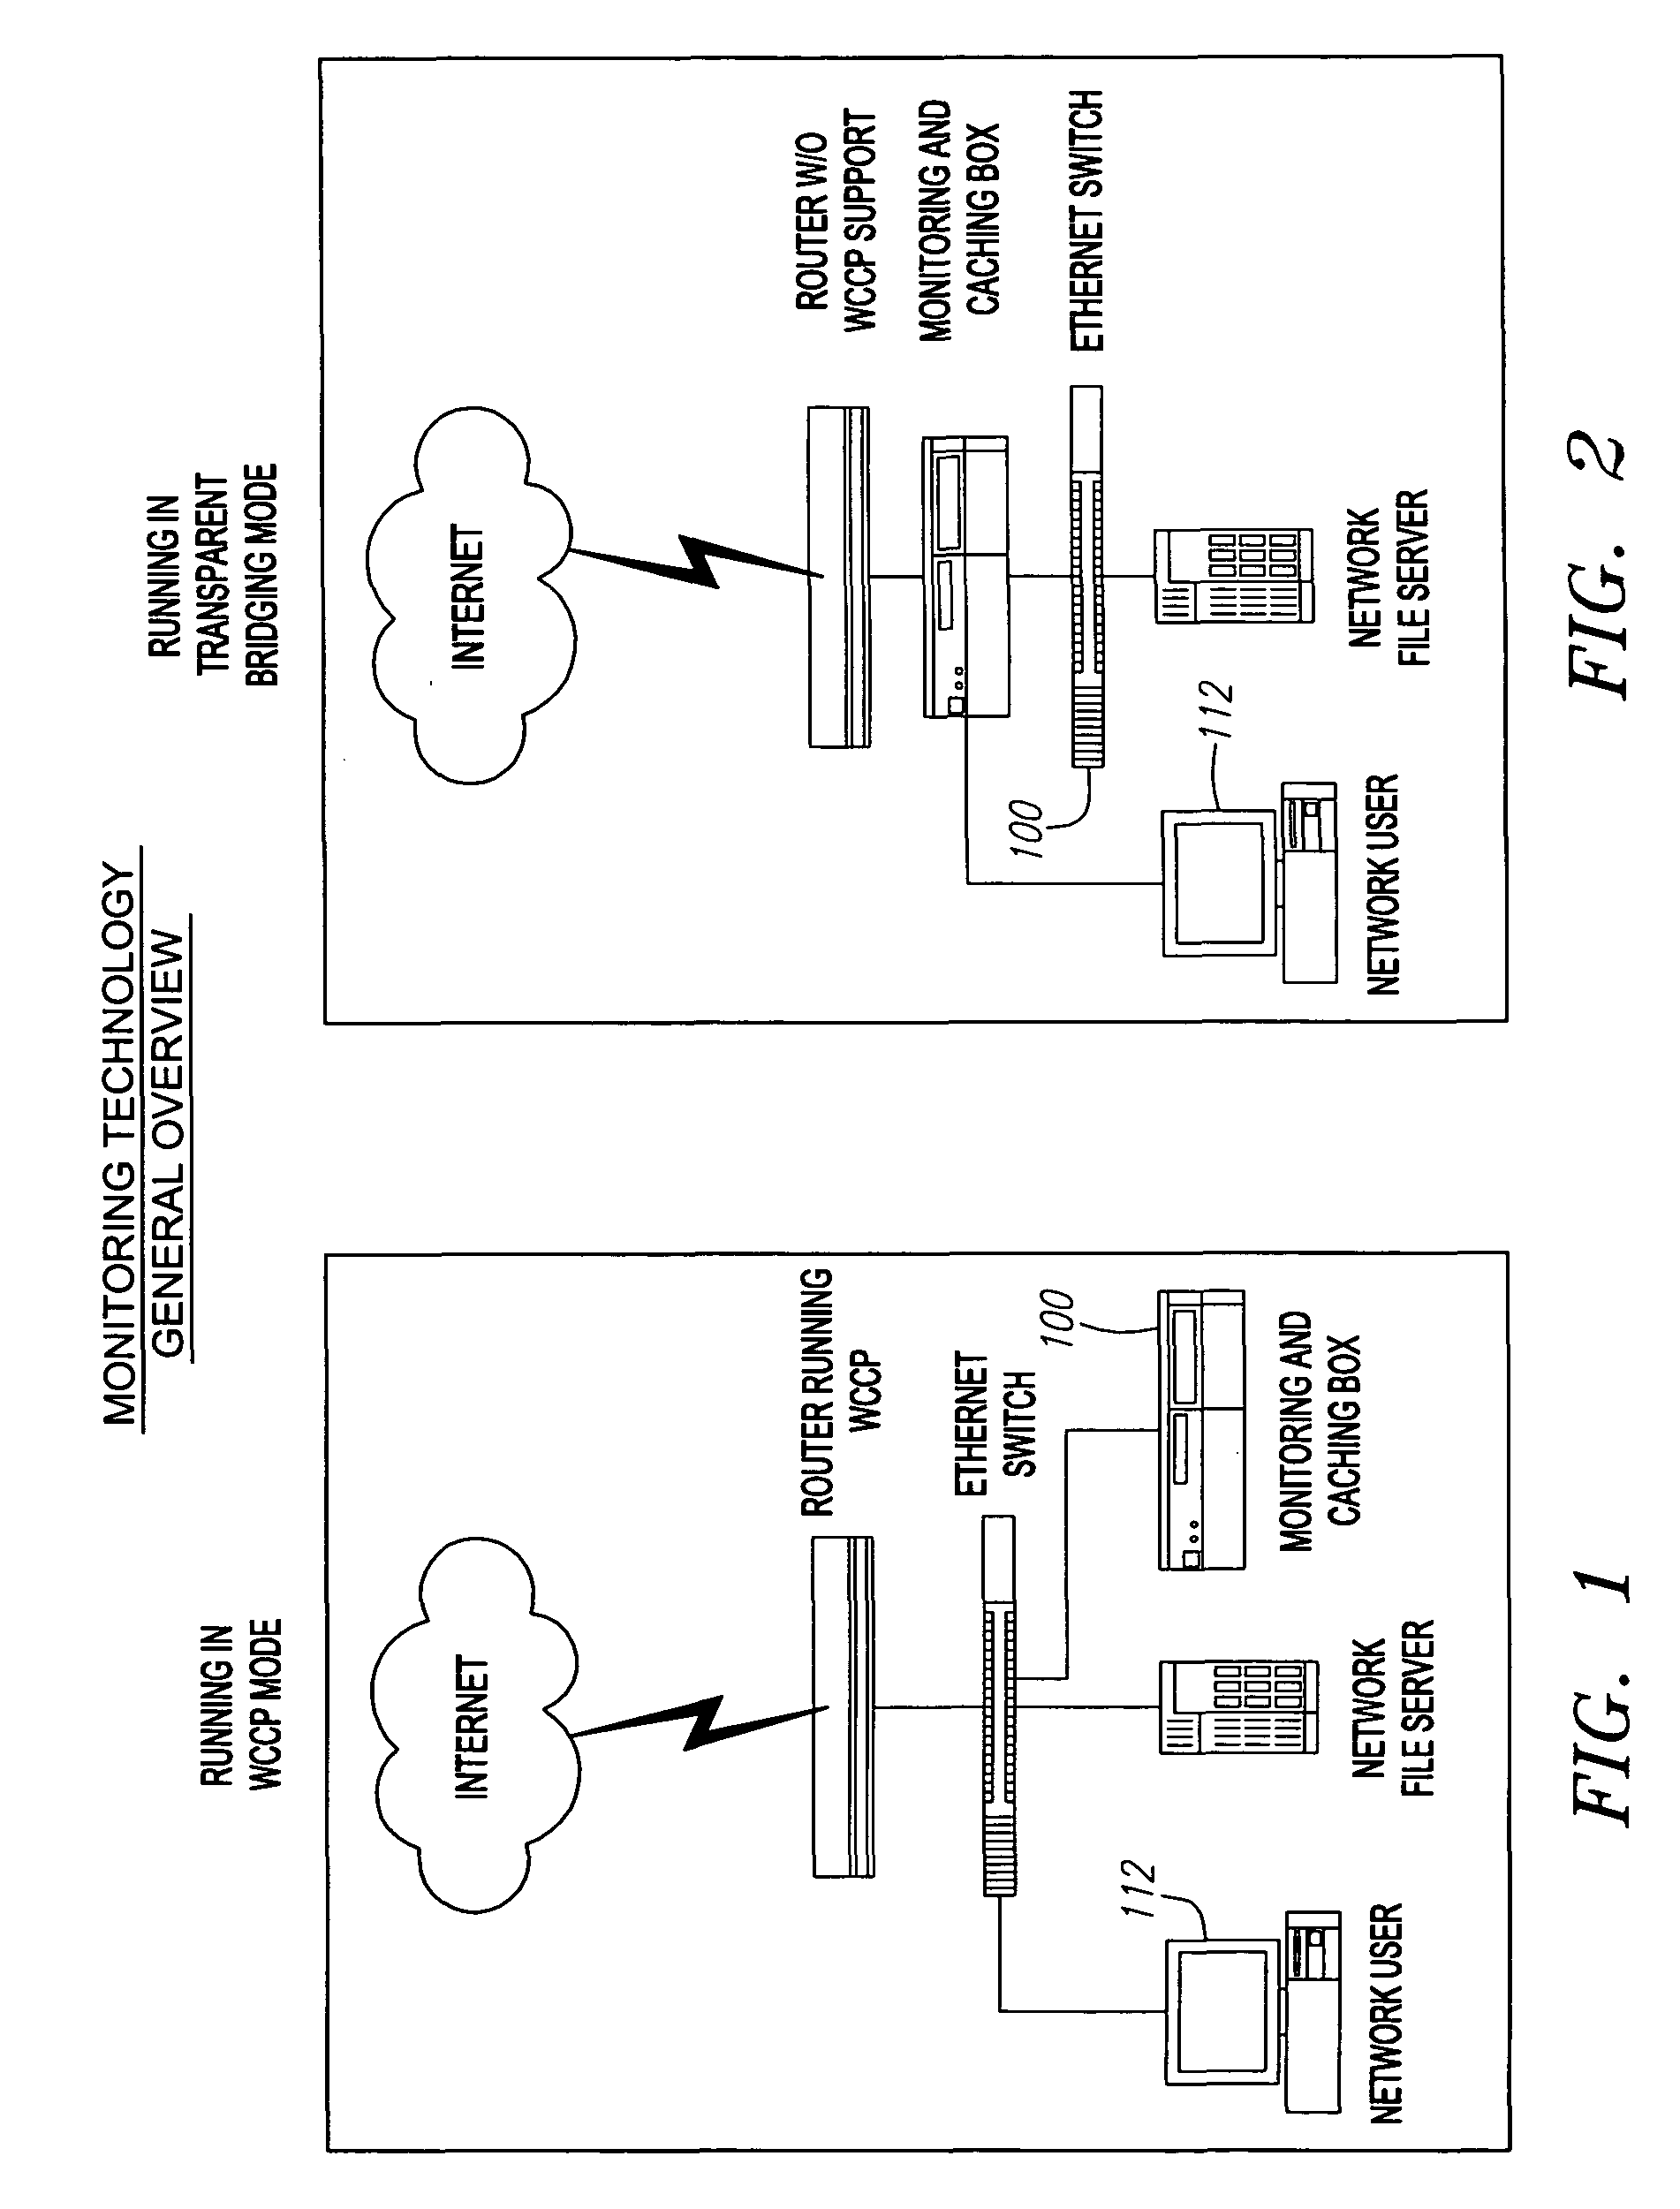 Process for monitoring, filtering and caching internet connections